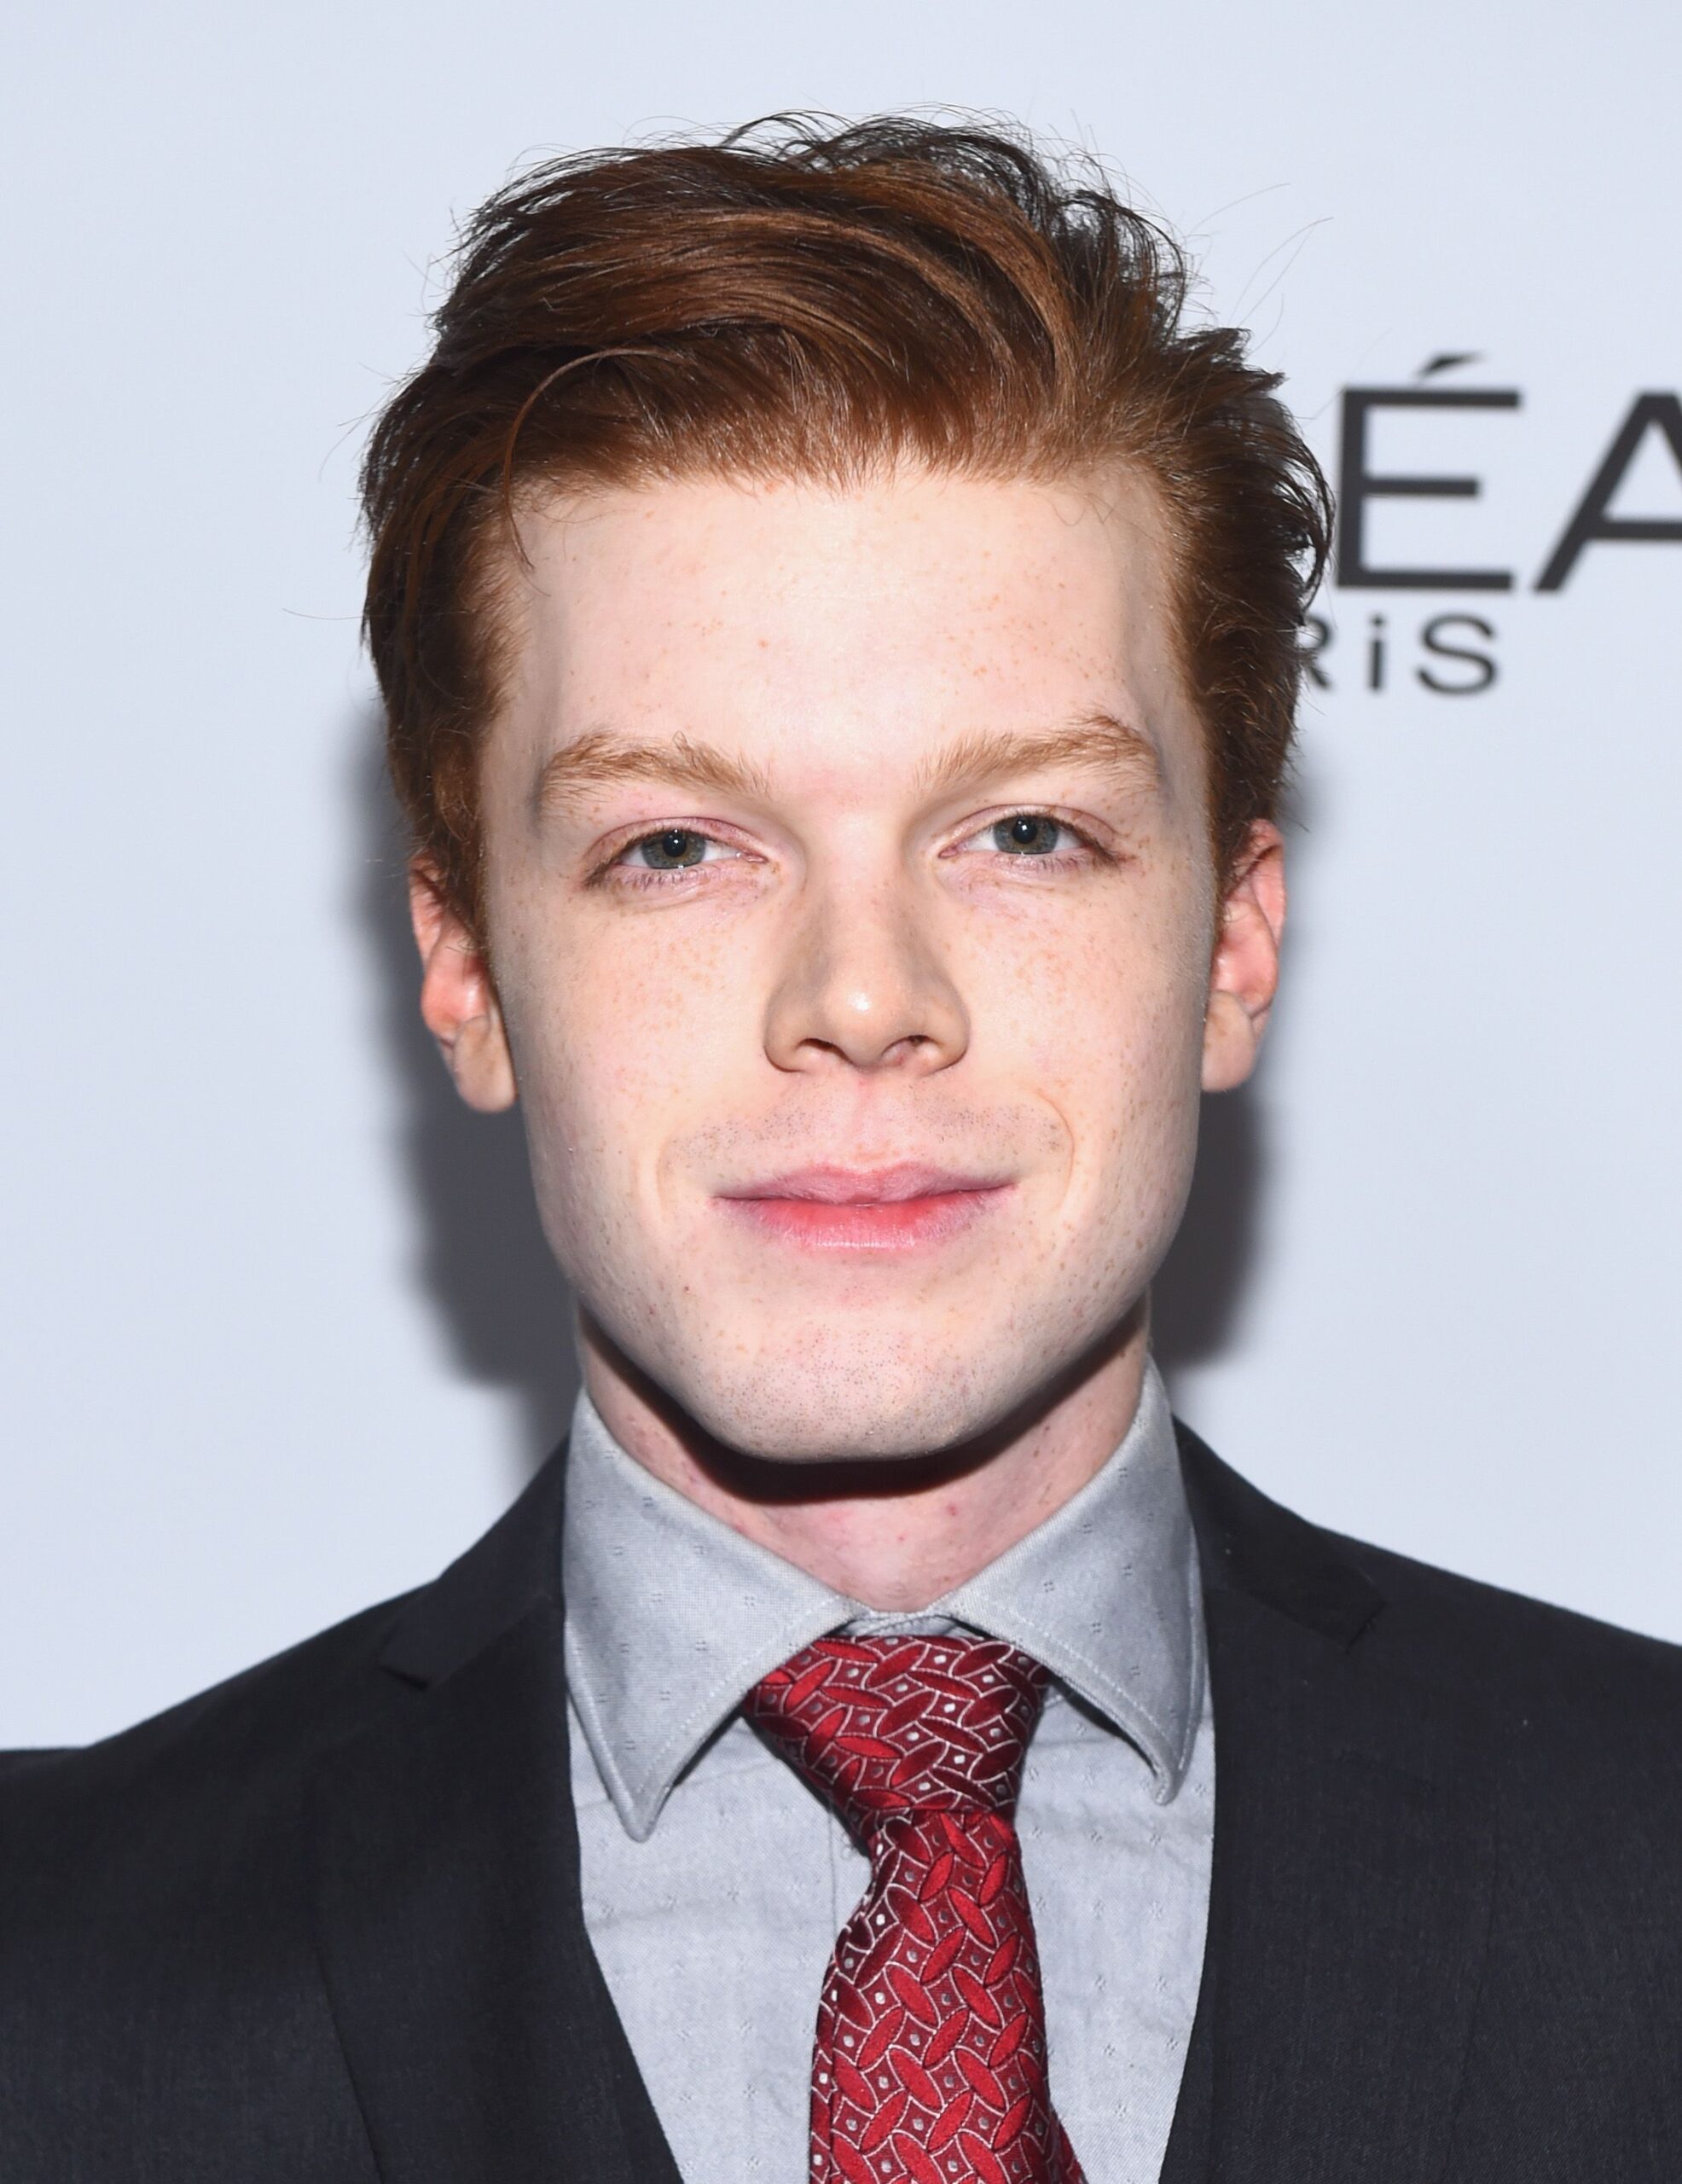 Cameron Monaghan Wife Is He Married Or Engaged To Lauren Searle? Gay